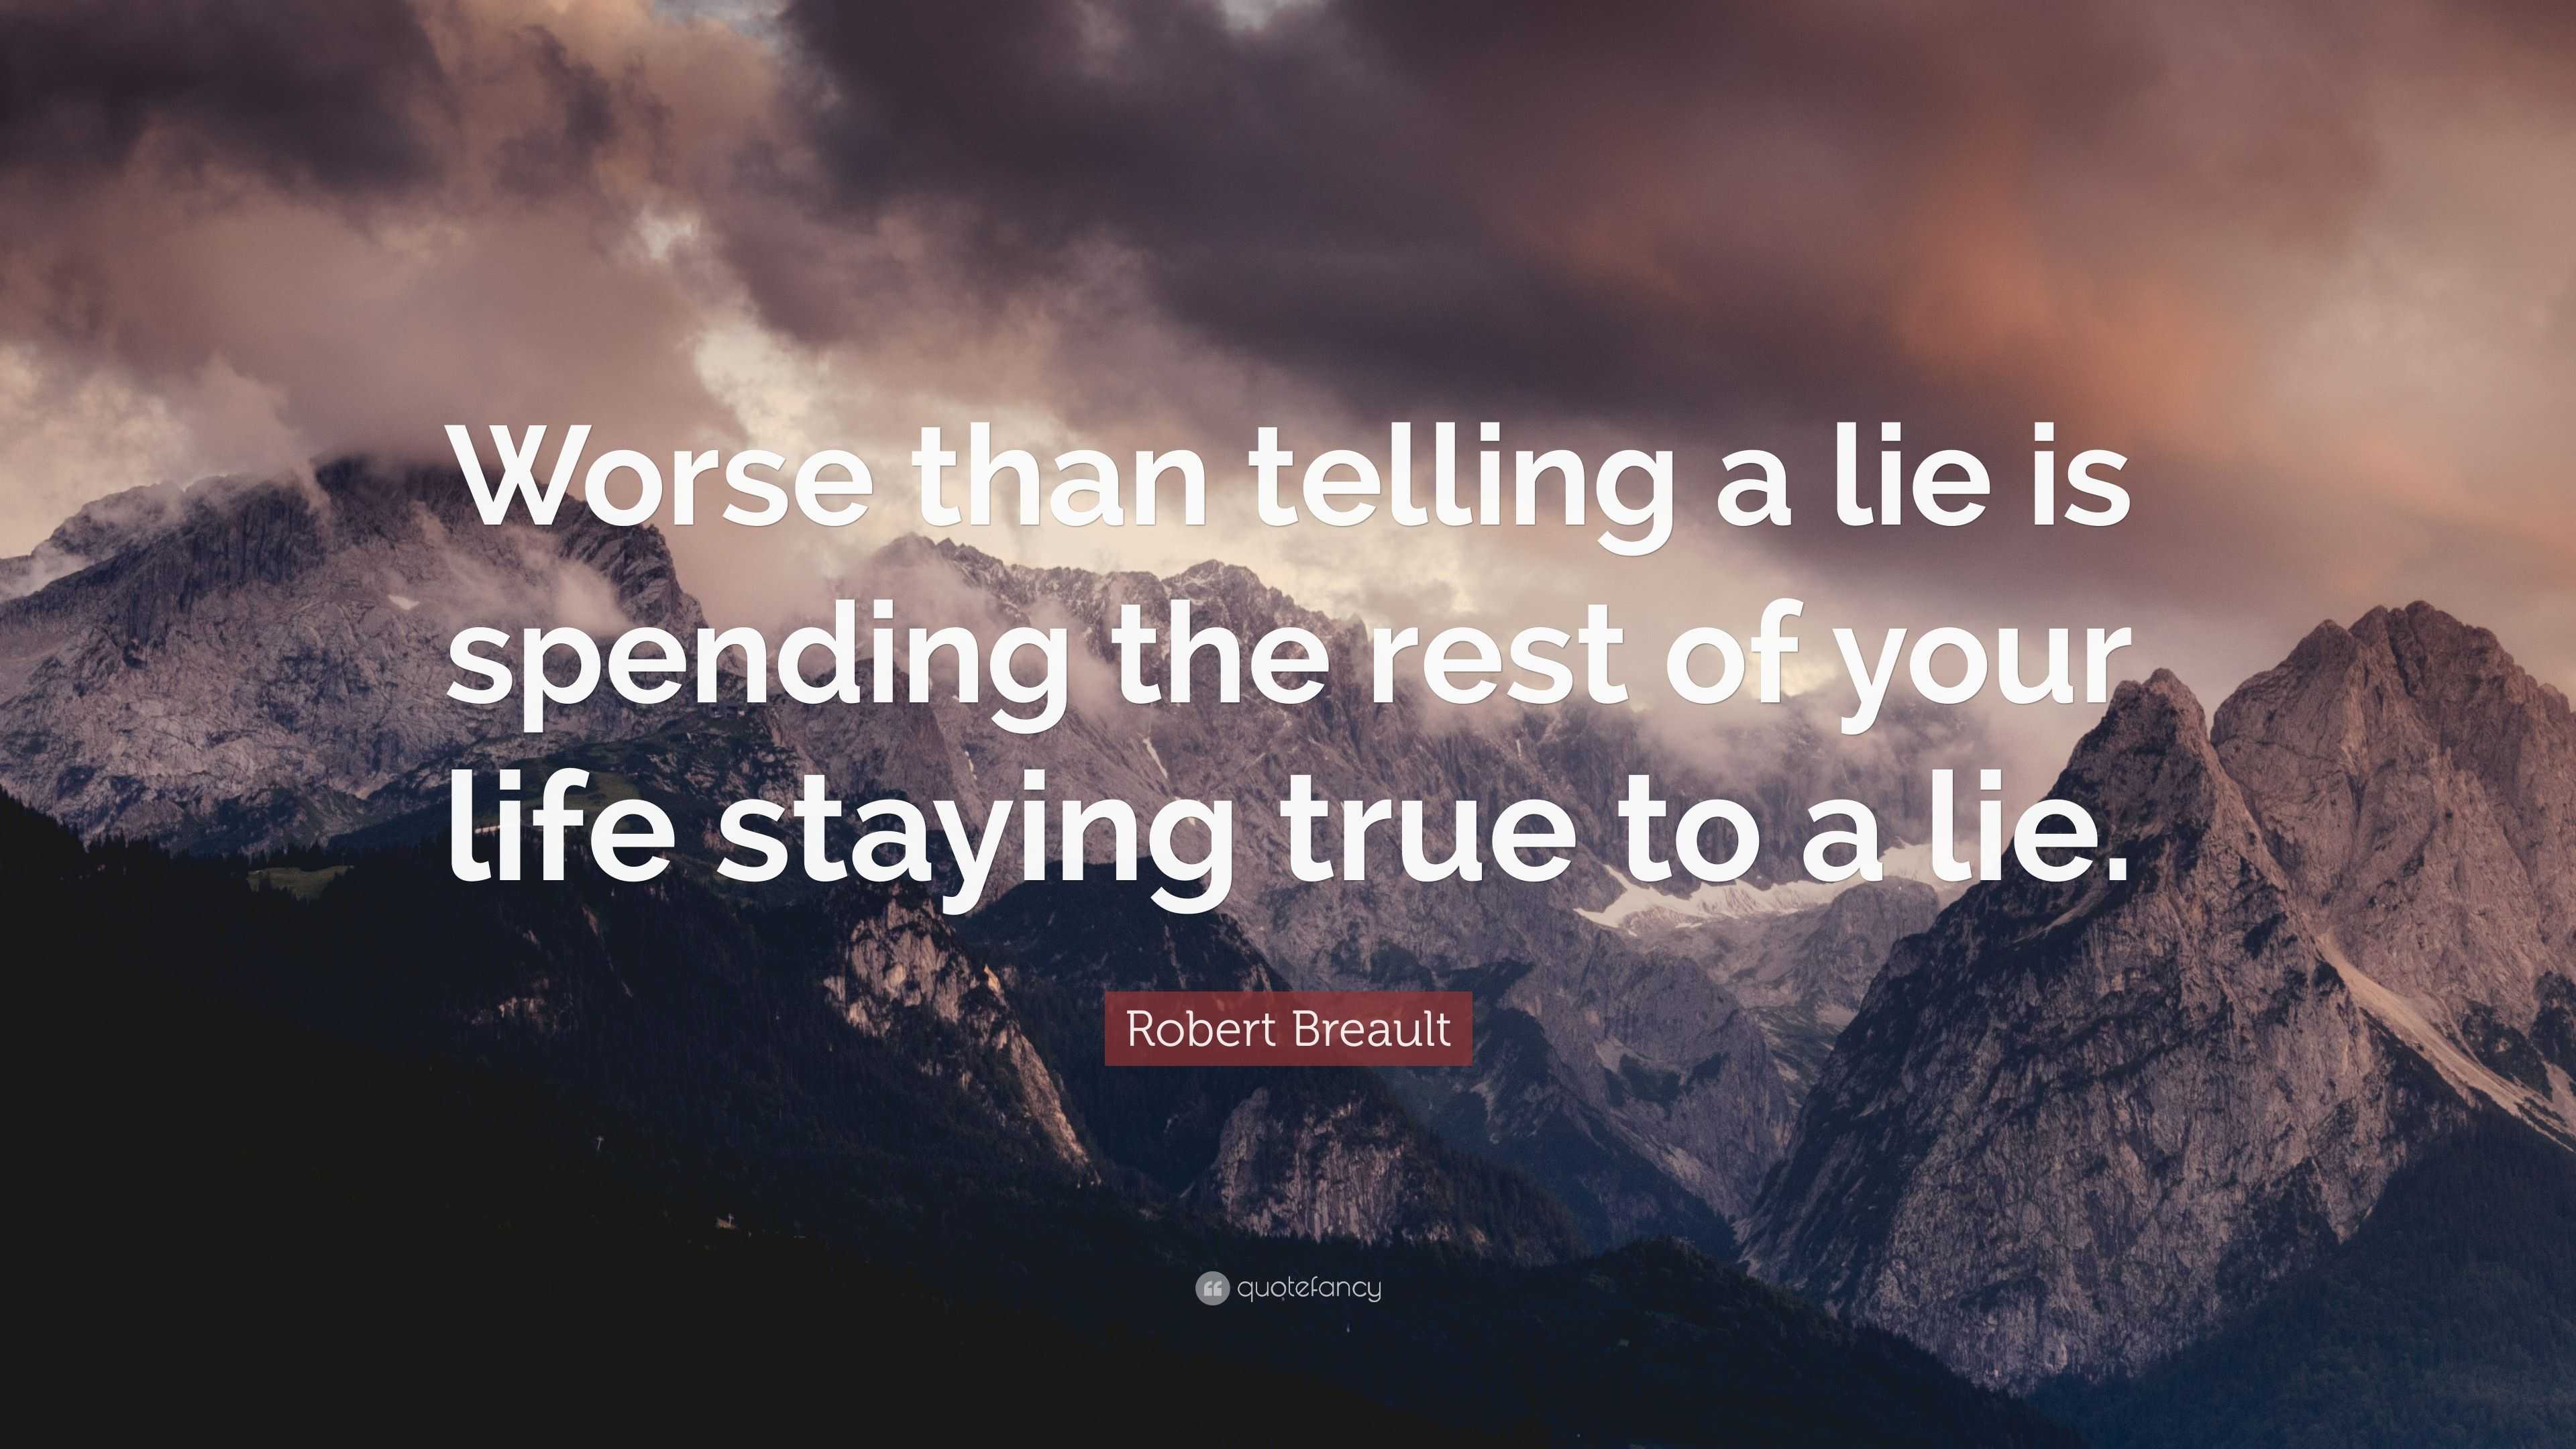 Robert Breault Quote “worse Than Telling A Lie Is Spending The Rest Of Your Life Staying True